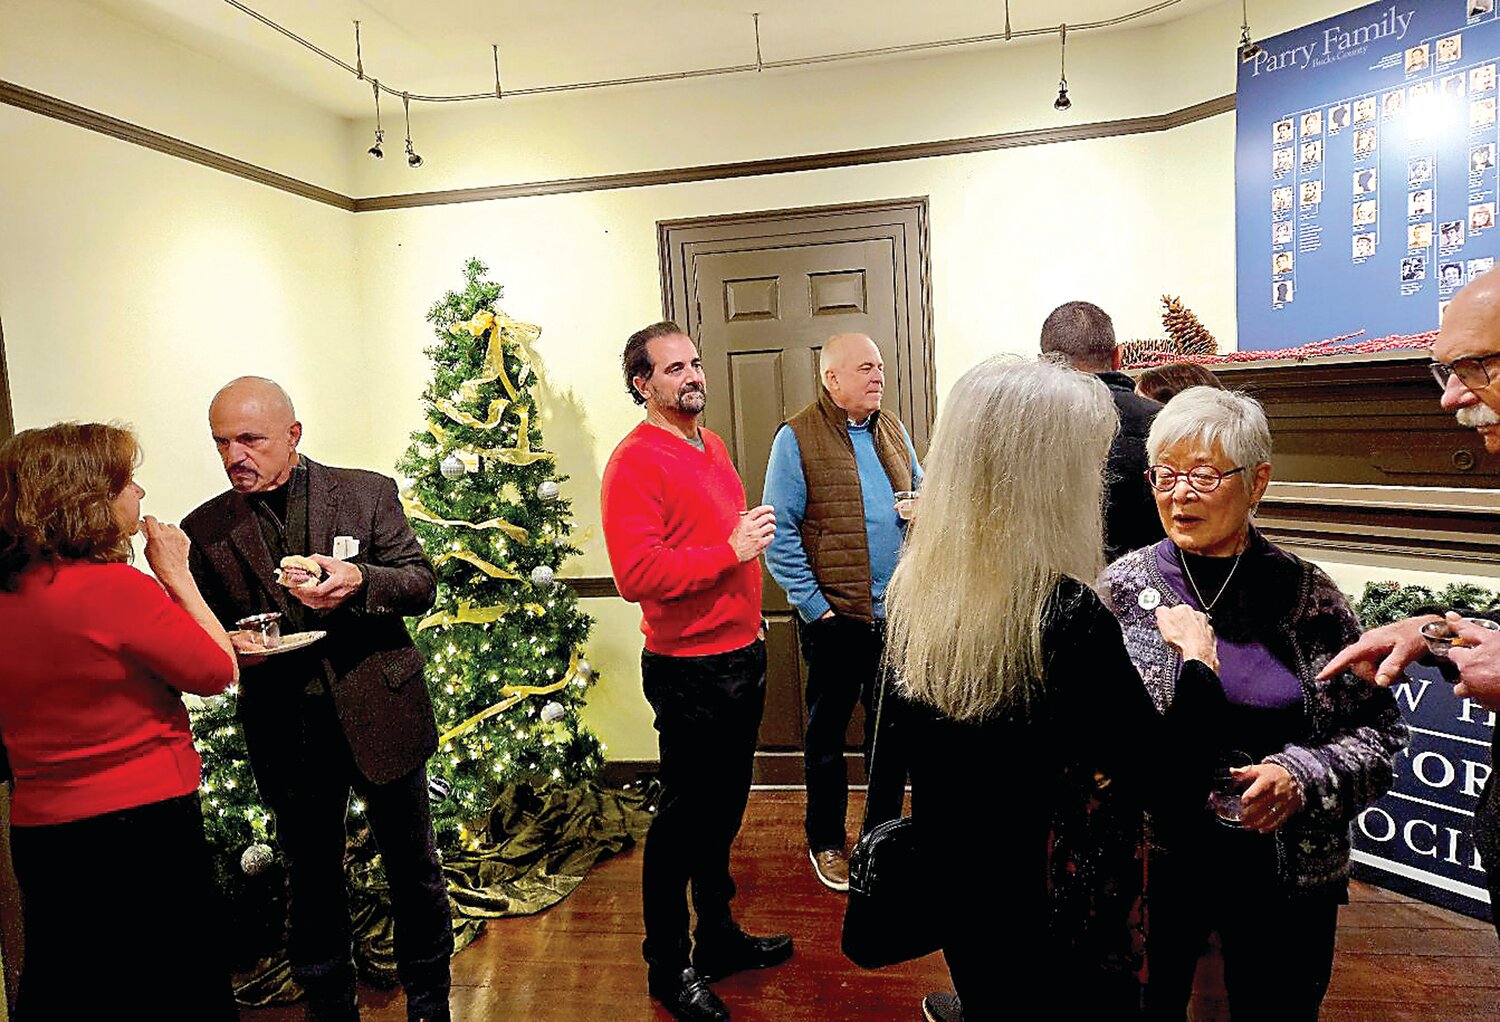 Members and guests of the New Hope Historical Society gathered Dec. 3 at the Parry Mansion Museum to celebrate the 55th anniversary of the Society’s popular Holiday Spirited Tea.